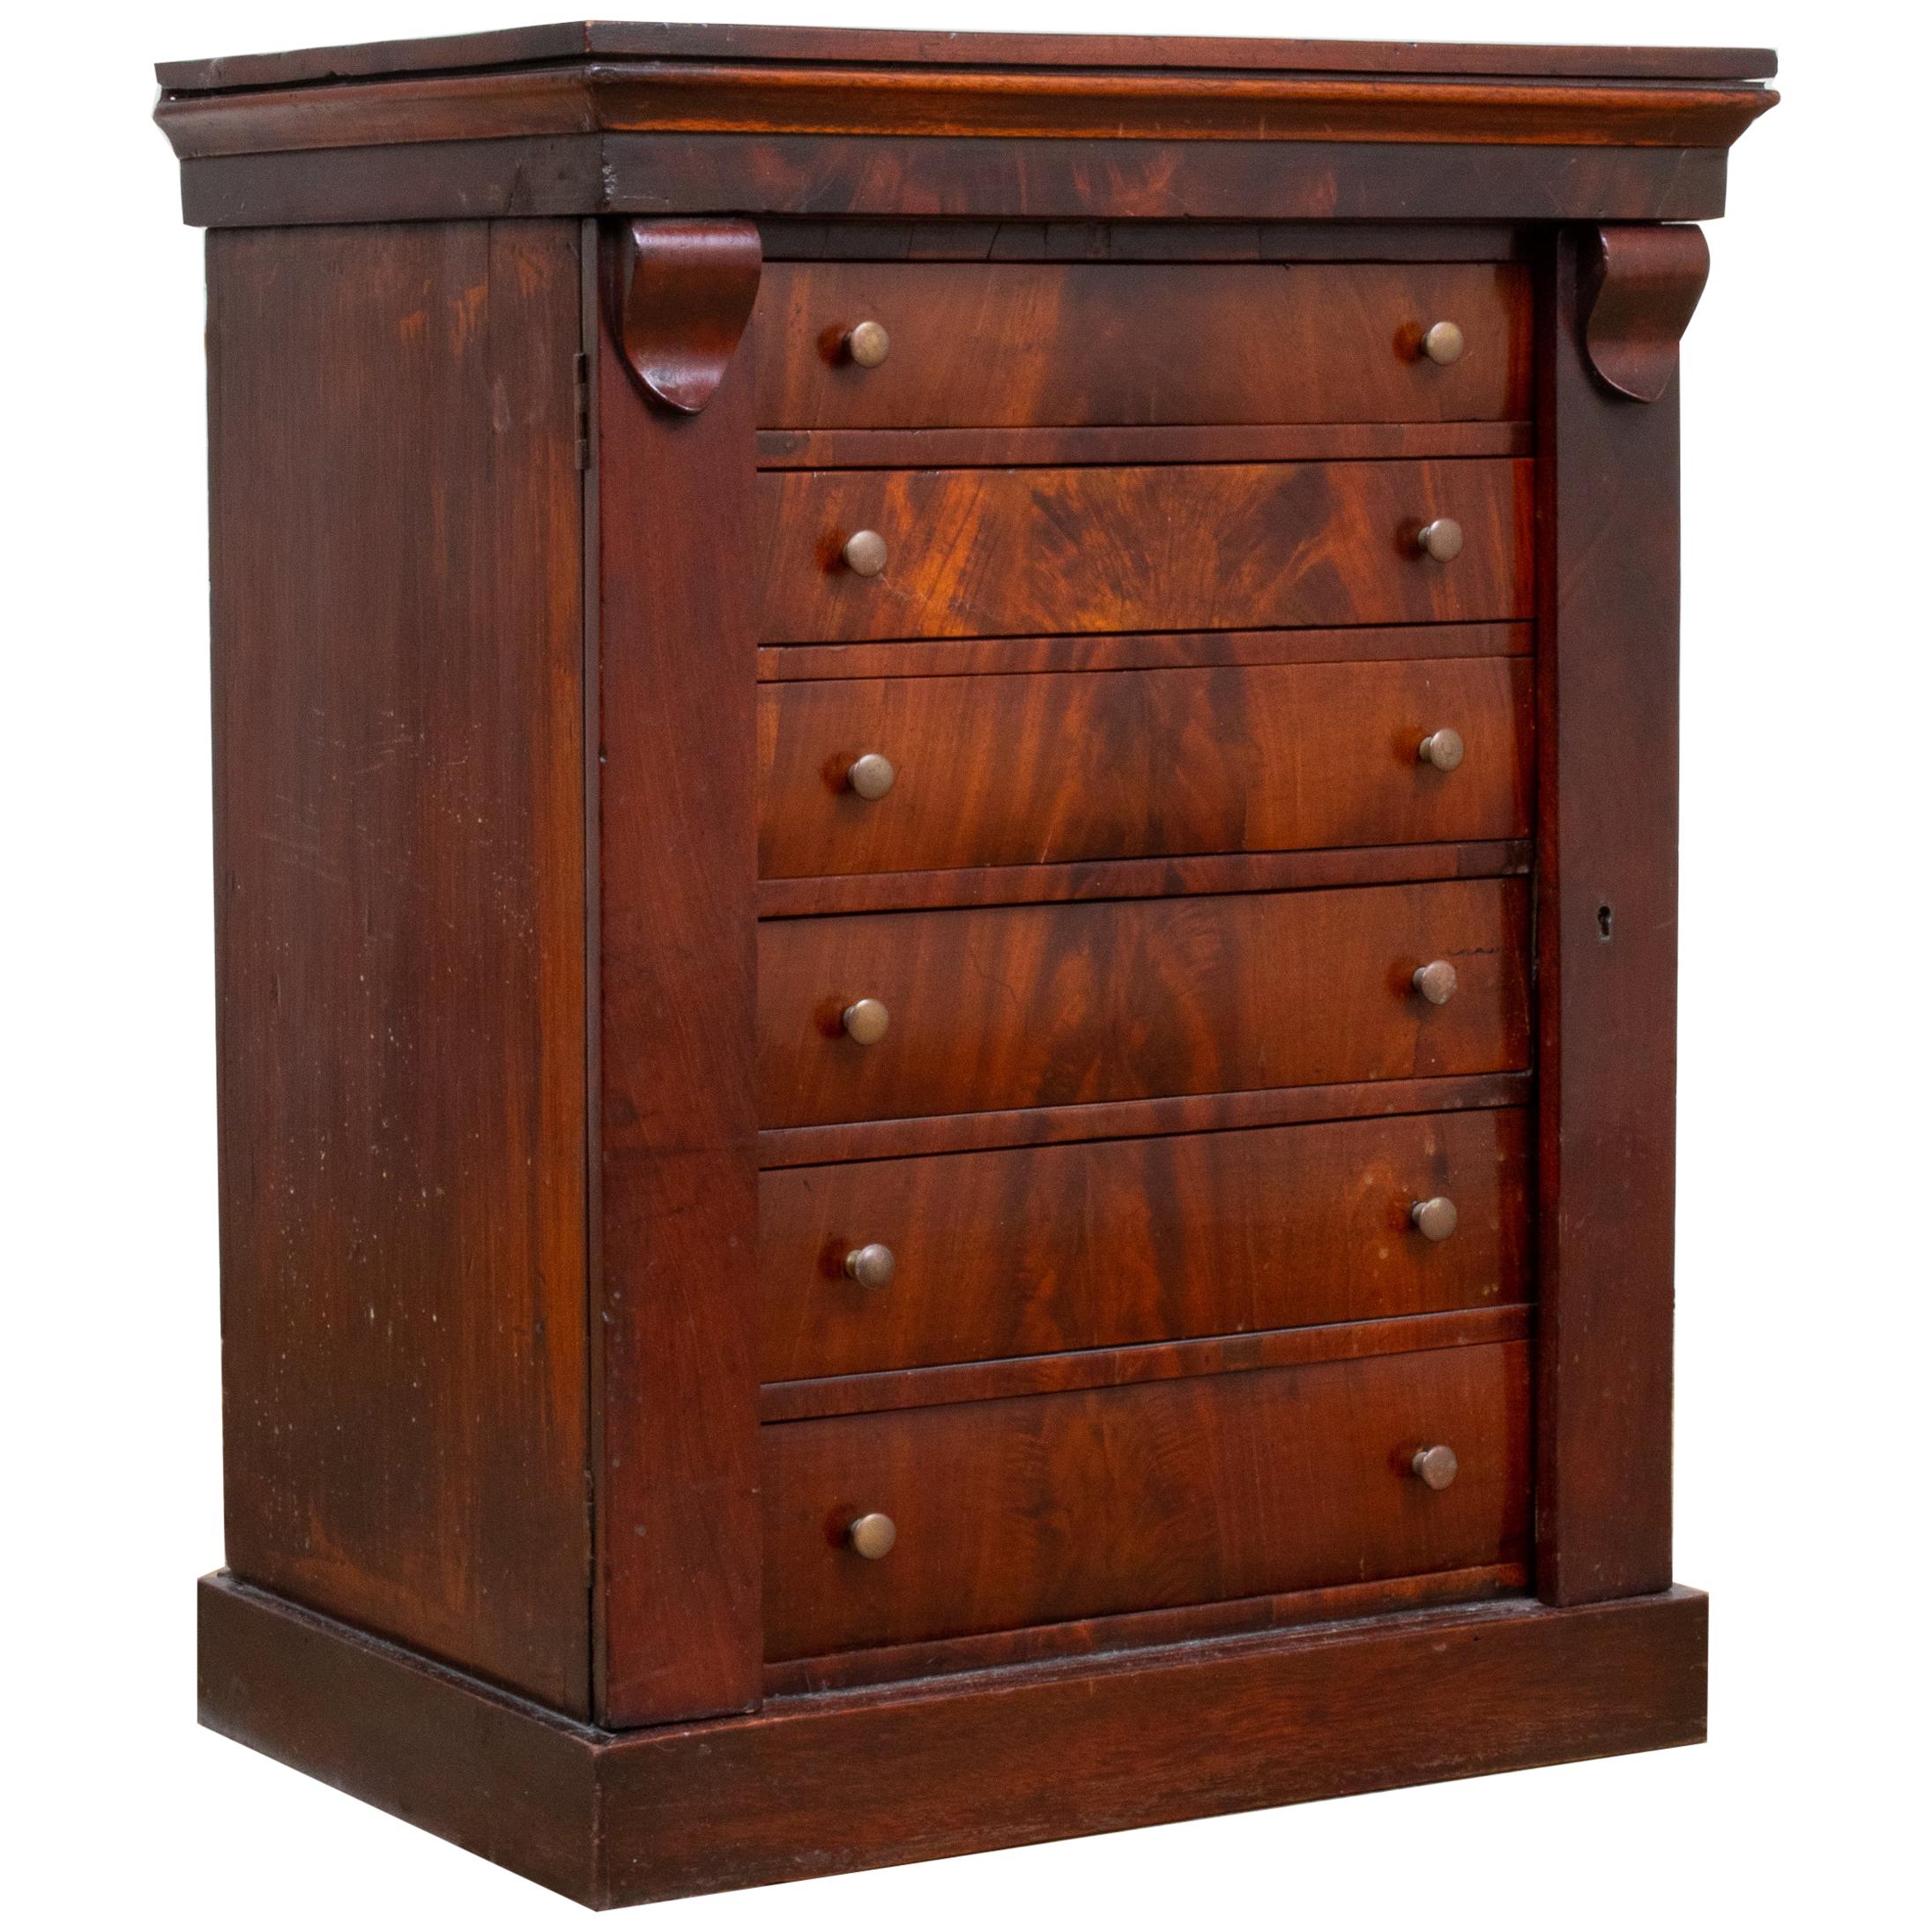 Empire Style Diminutive Flame Mahogany Chest of Drawers